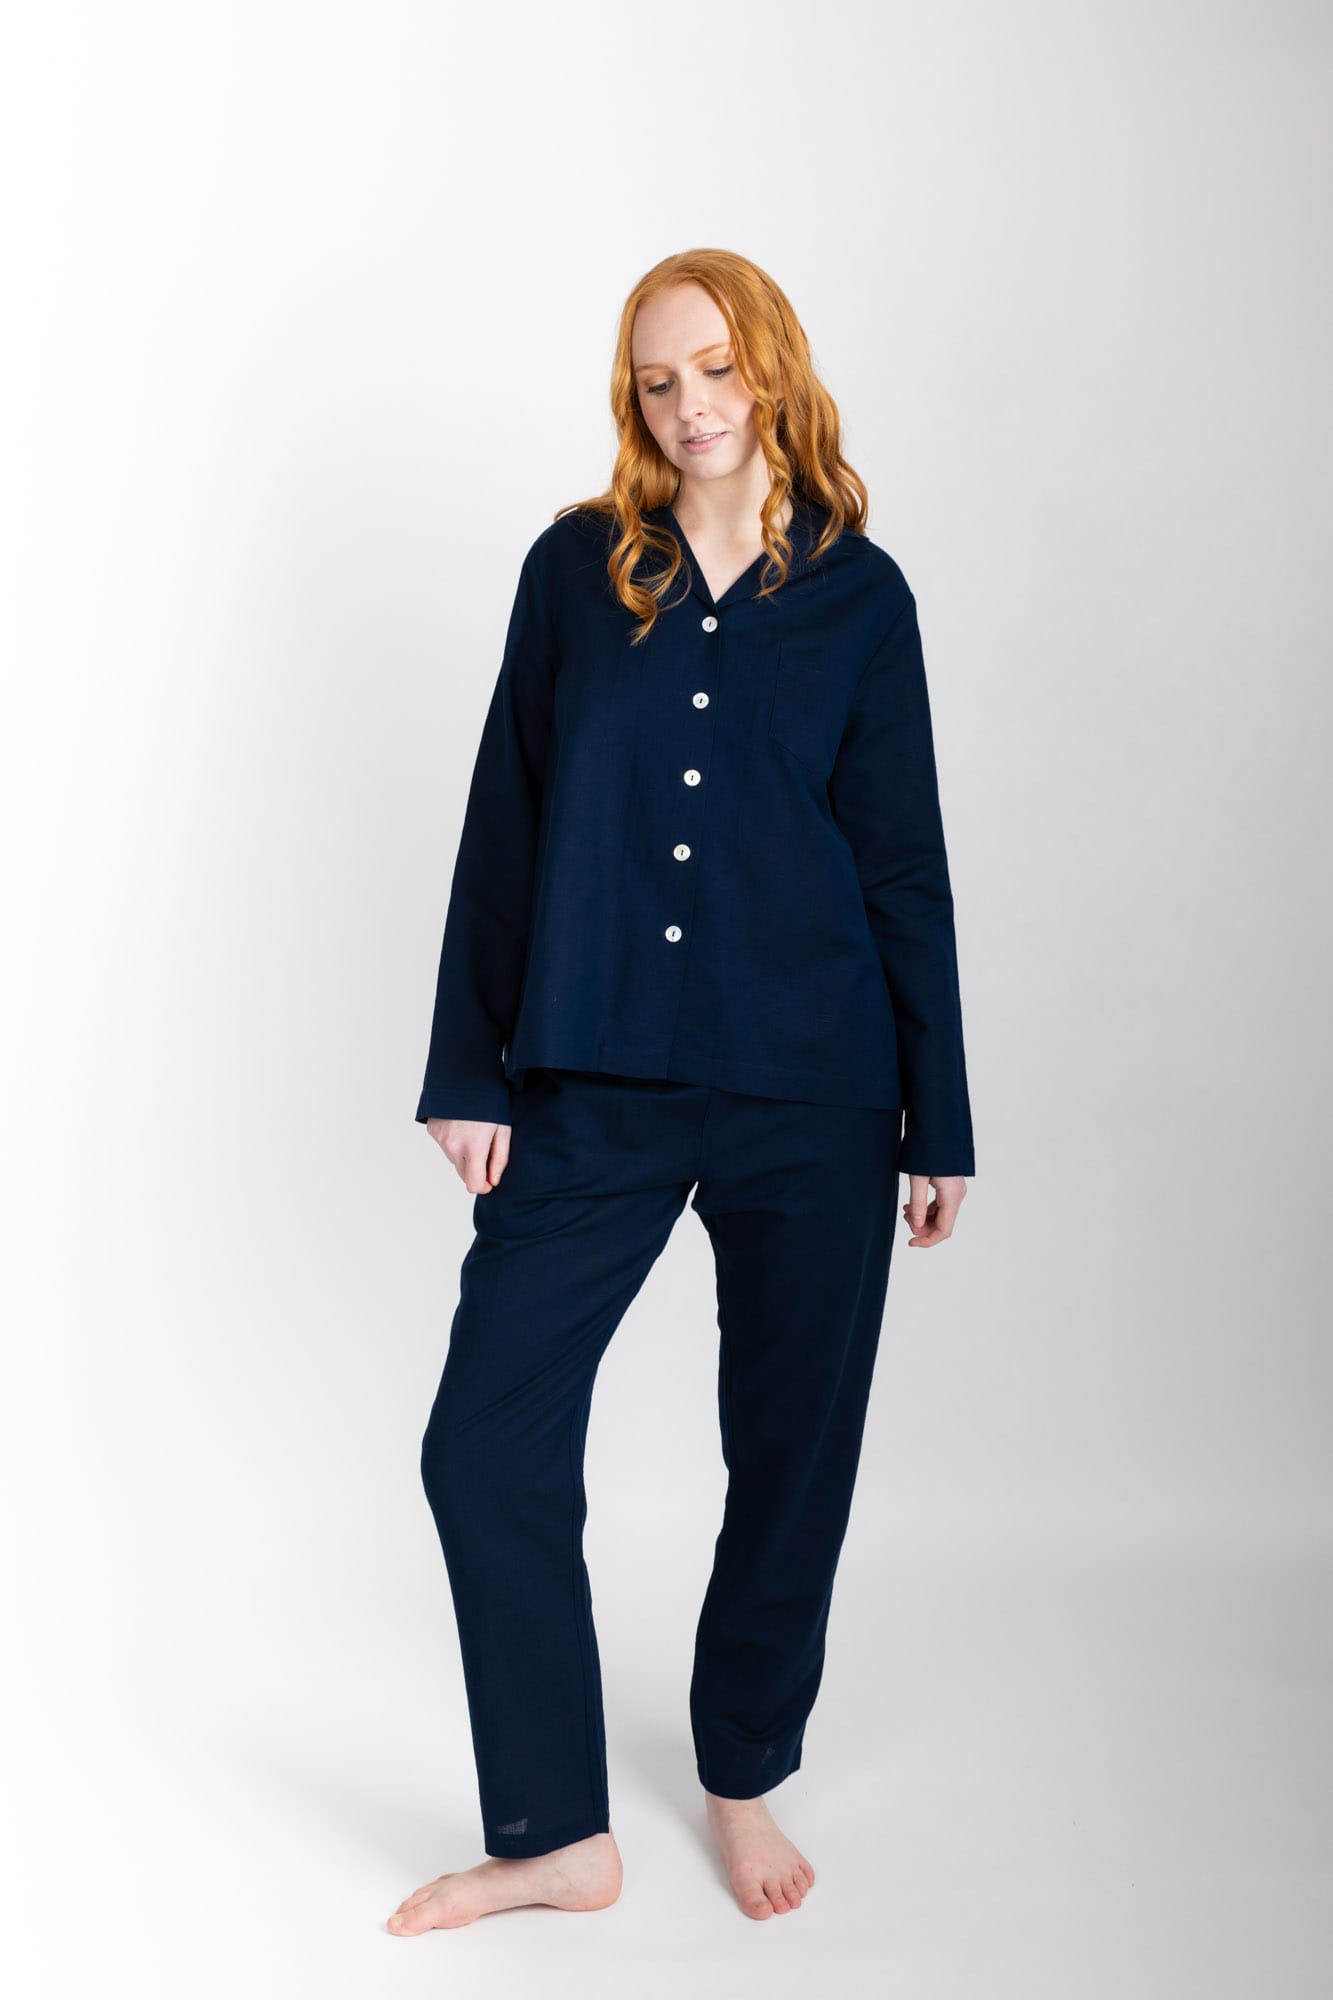 Women’s pyjama set including a long sleeve shirt and long sleeve pants. Made from an organic cotton and linen blend, in Navy.  The shirt has shell buttons, a front pocket and a back pleat.  The pants feature an elasticated waistband for comfort.